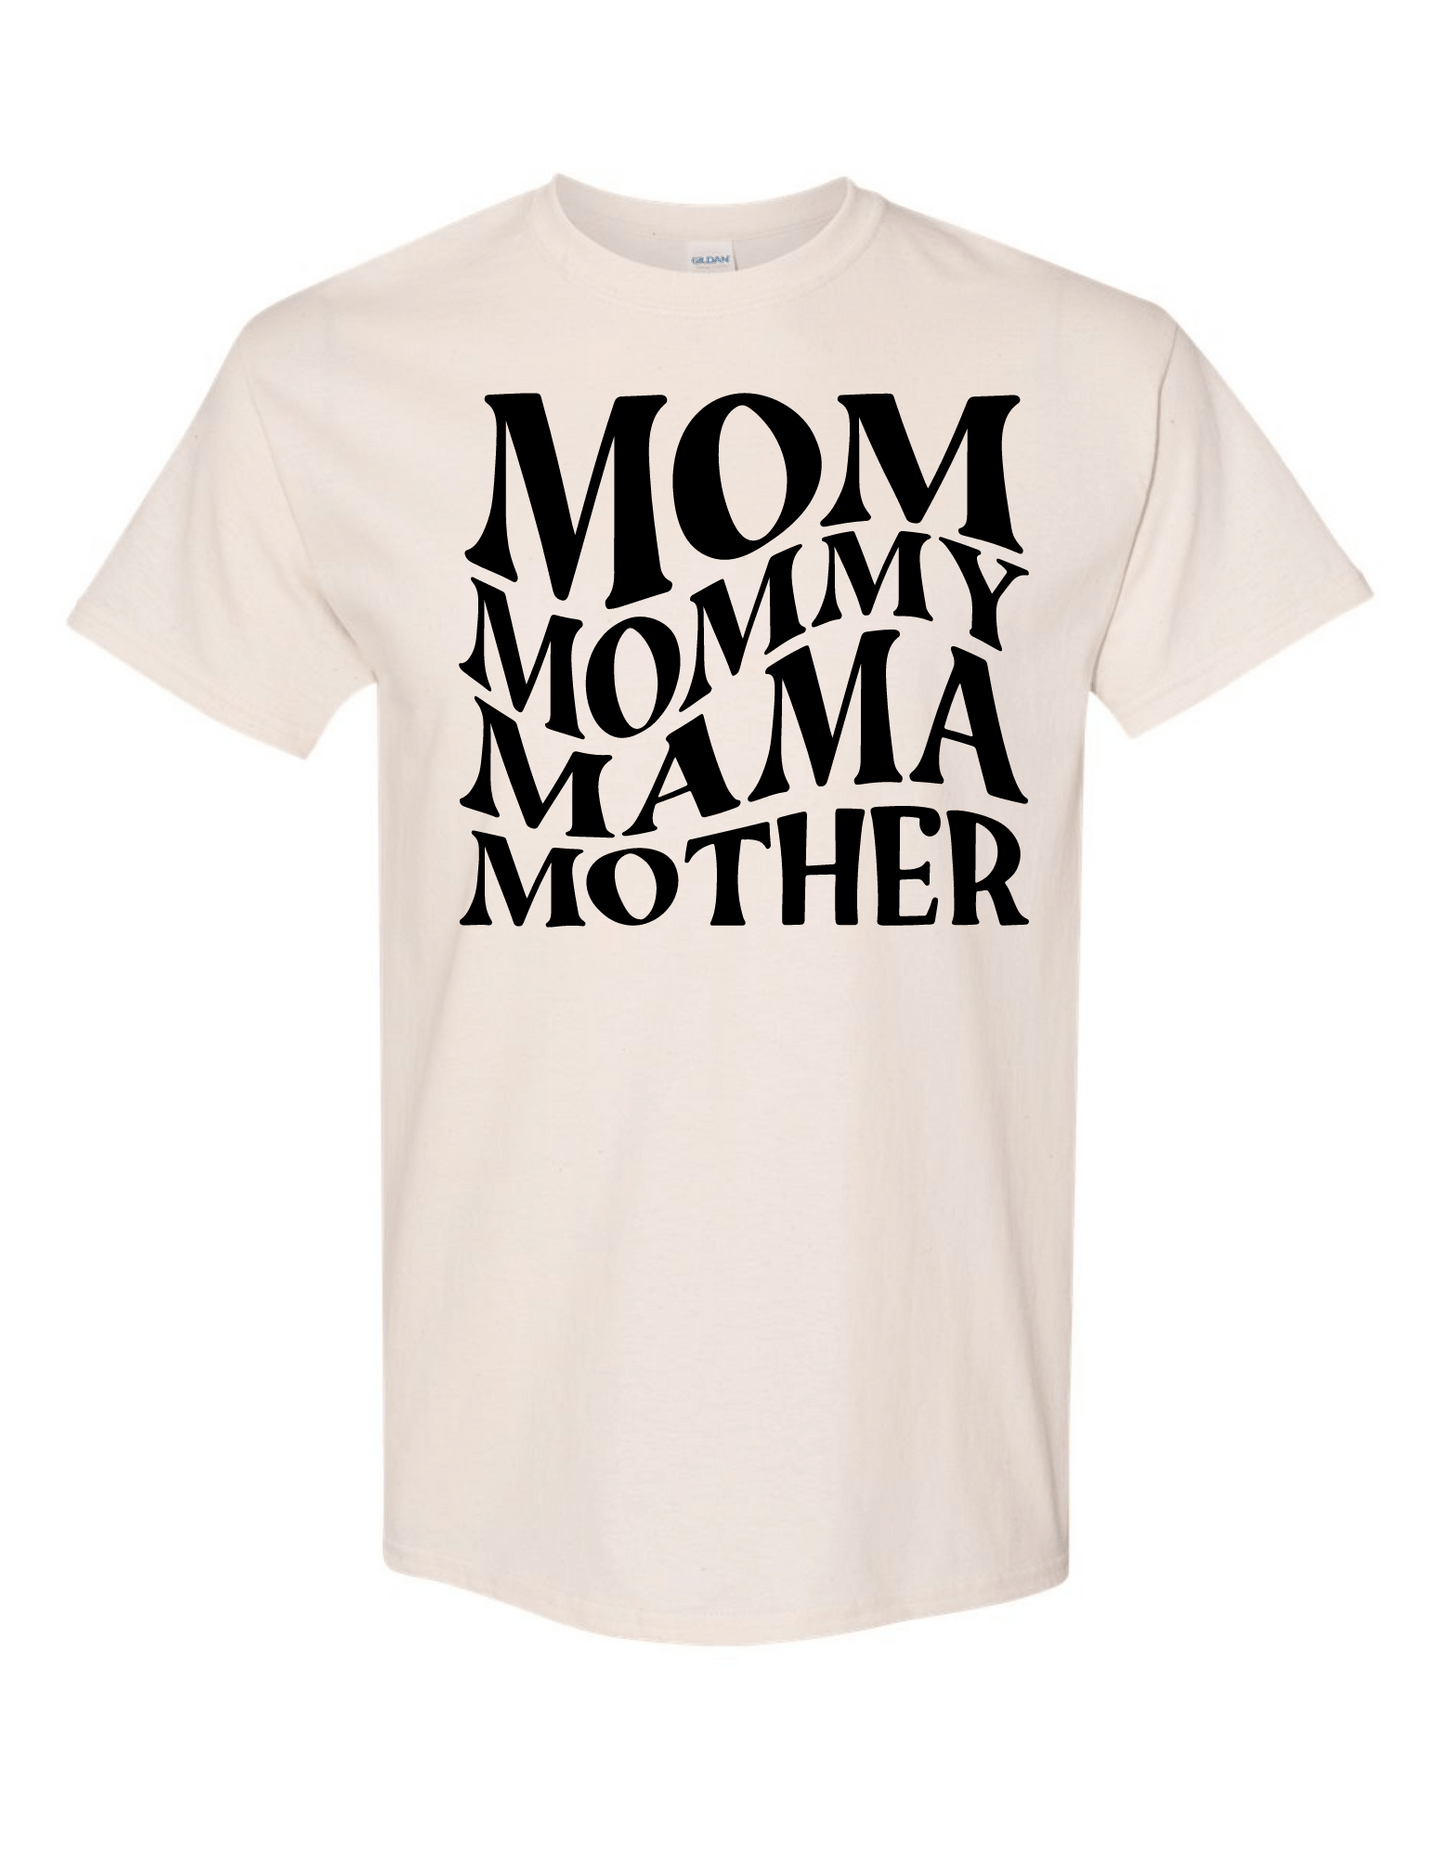 Made to Order Handmade Mom, Mommy, Mama, Mother Mother's Day Short Sleeve Shirt